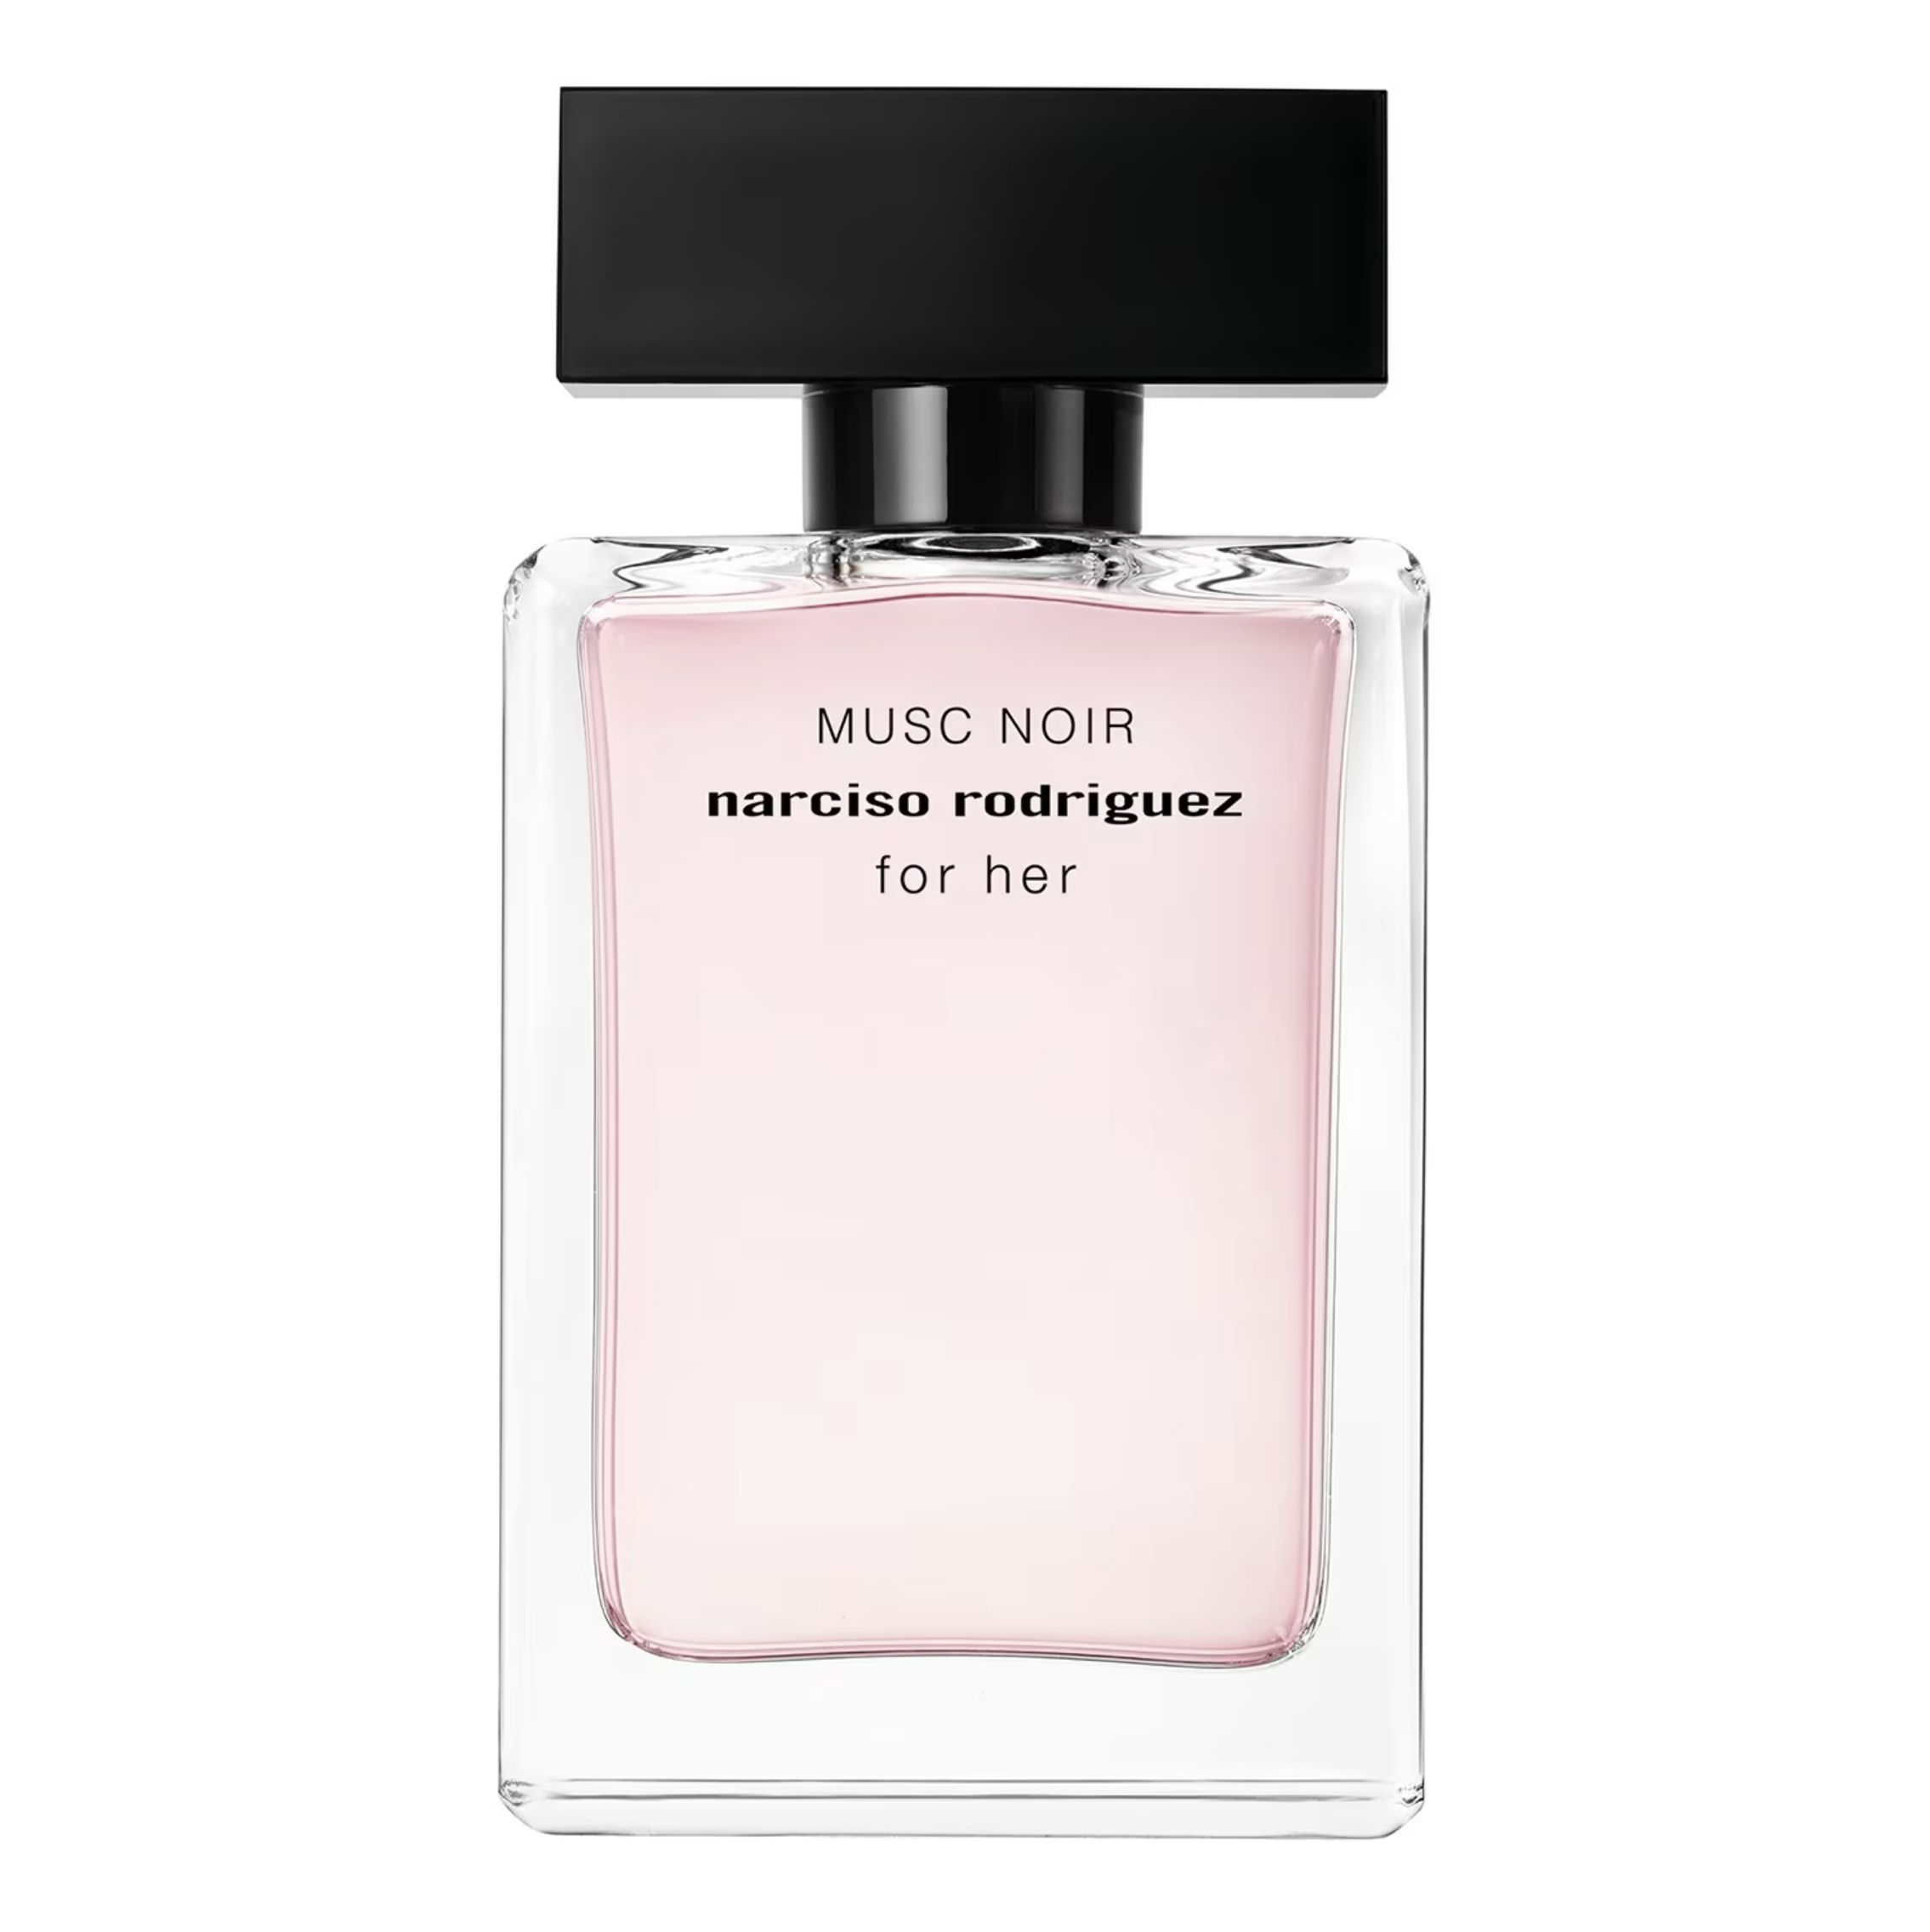 Туалетная вода нарциссо родригес. Narciso Rodriguez Musc Noir for her EDP 100. Narciso Rodriguez for her Eau de Parfum парфюмерная вода 100 мл. Narciso Rodriguez Pure Musc,100 мл. EDP Narciso Rodriguez Pure Musc for her 50 ml.